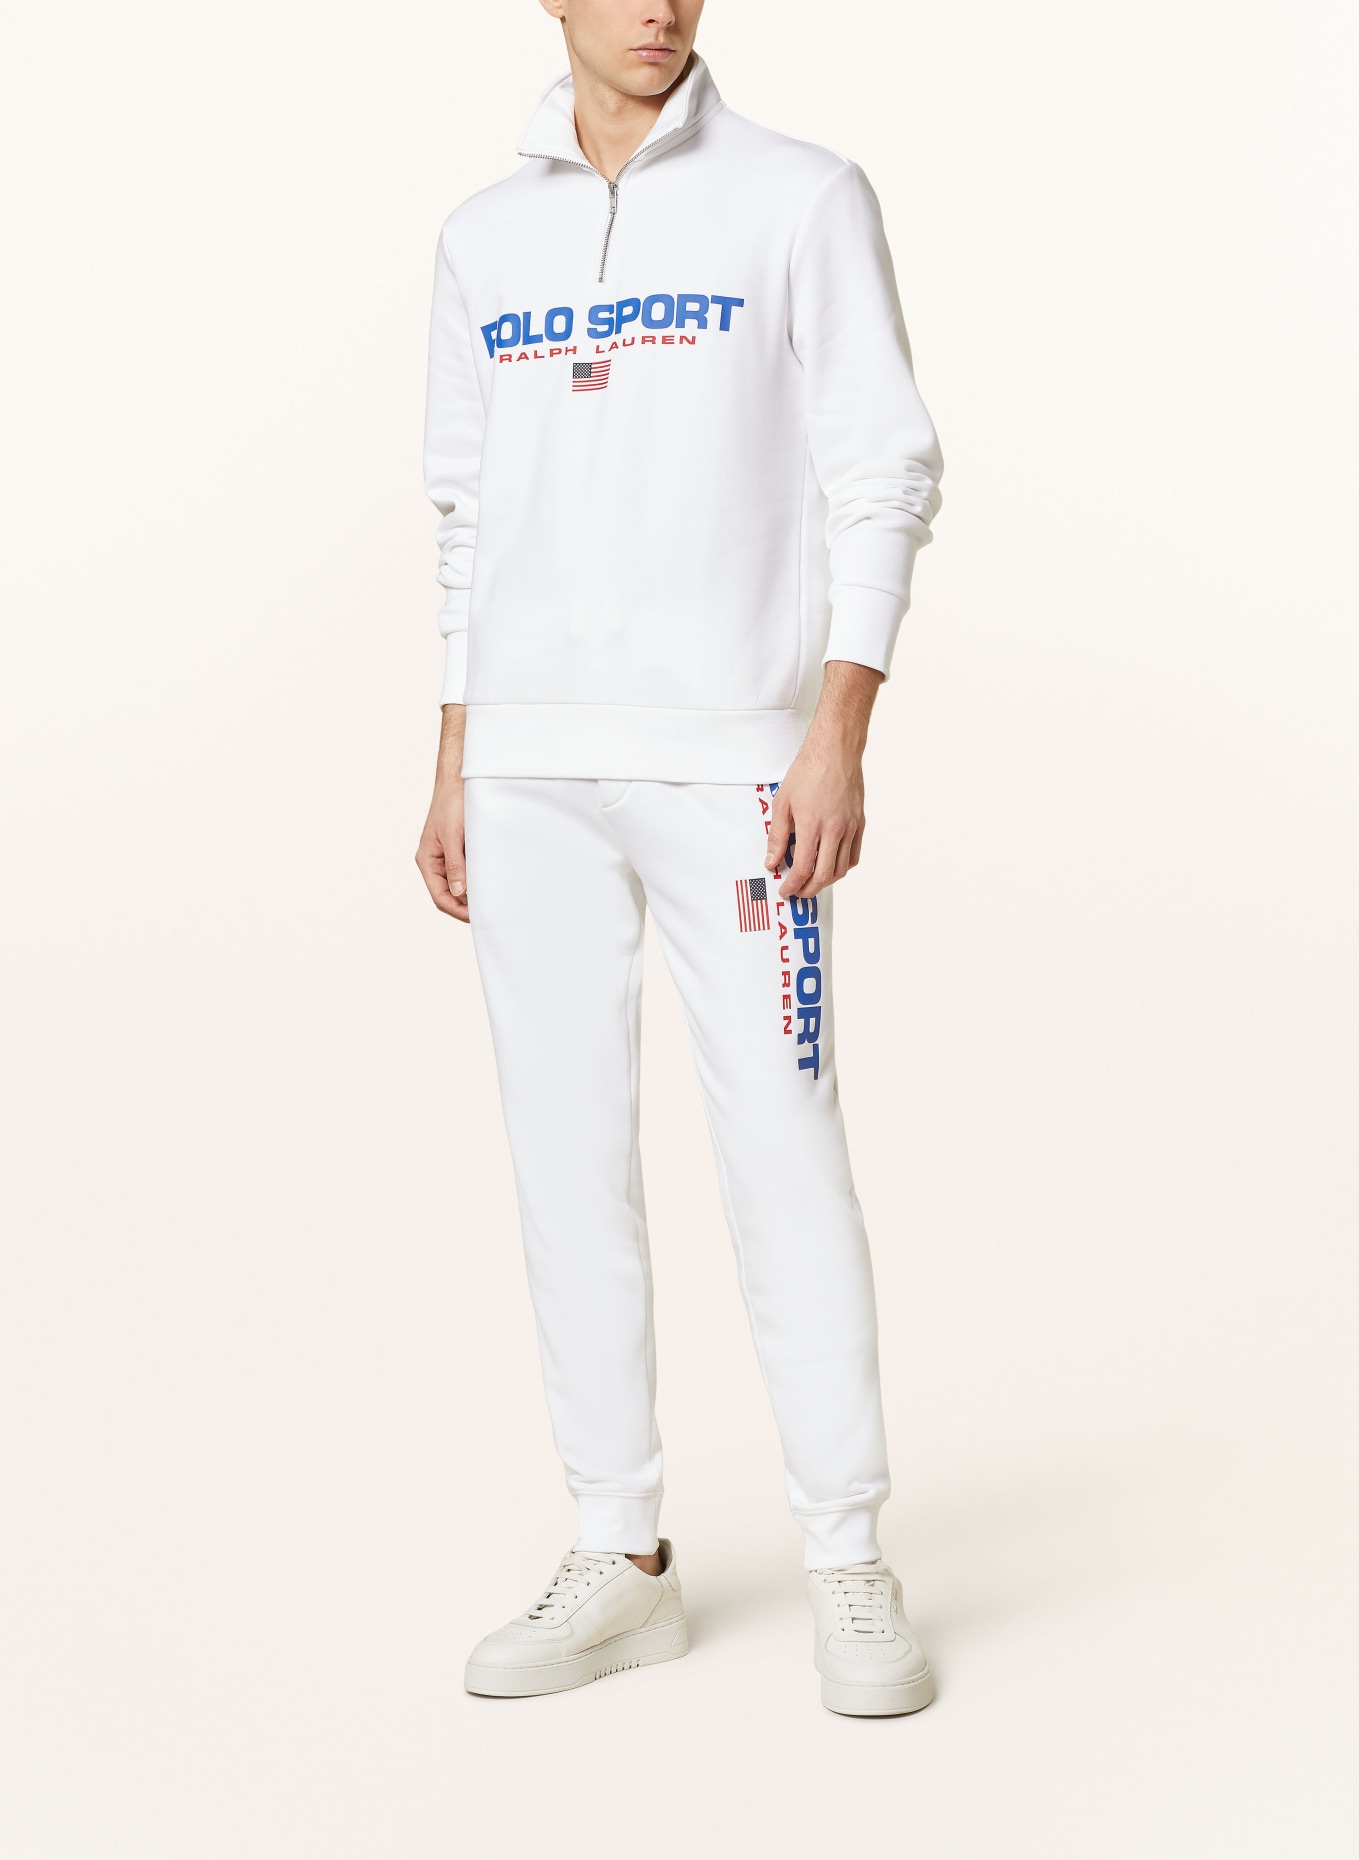 POLO SPORT Sweatshirt fabric half-zip sweater, Color: WHITE/ BLUE/ RED (Image 2)